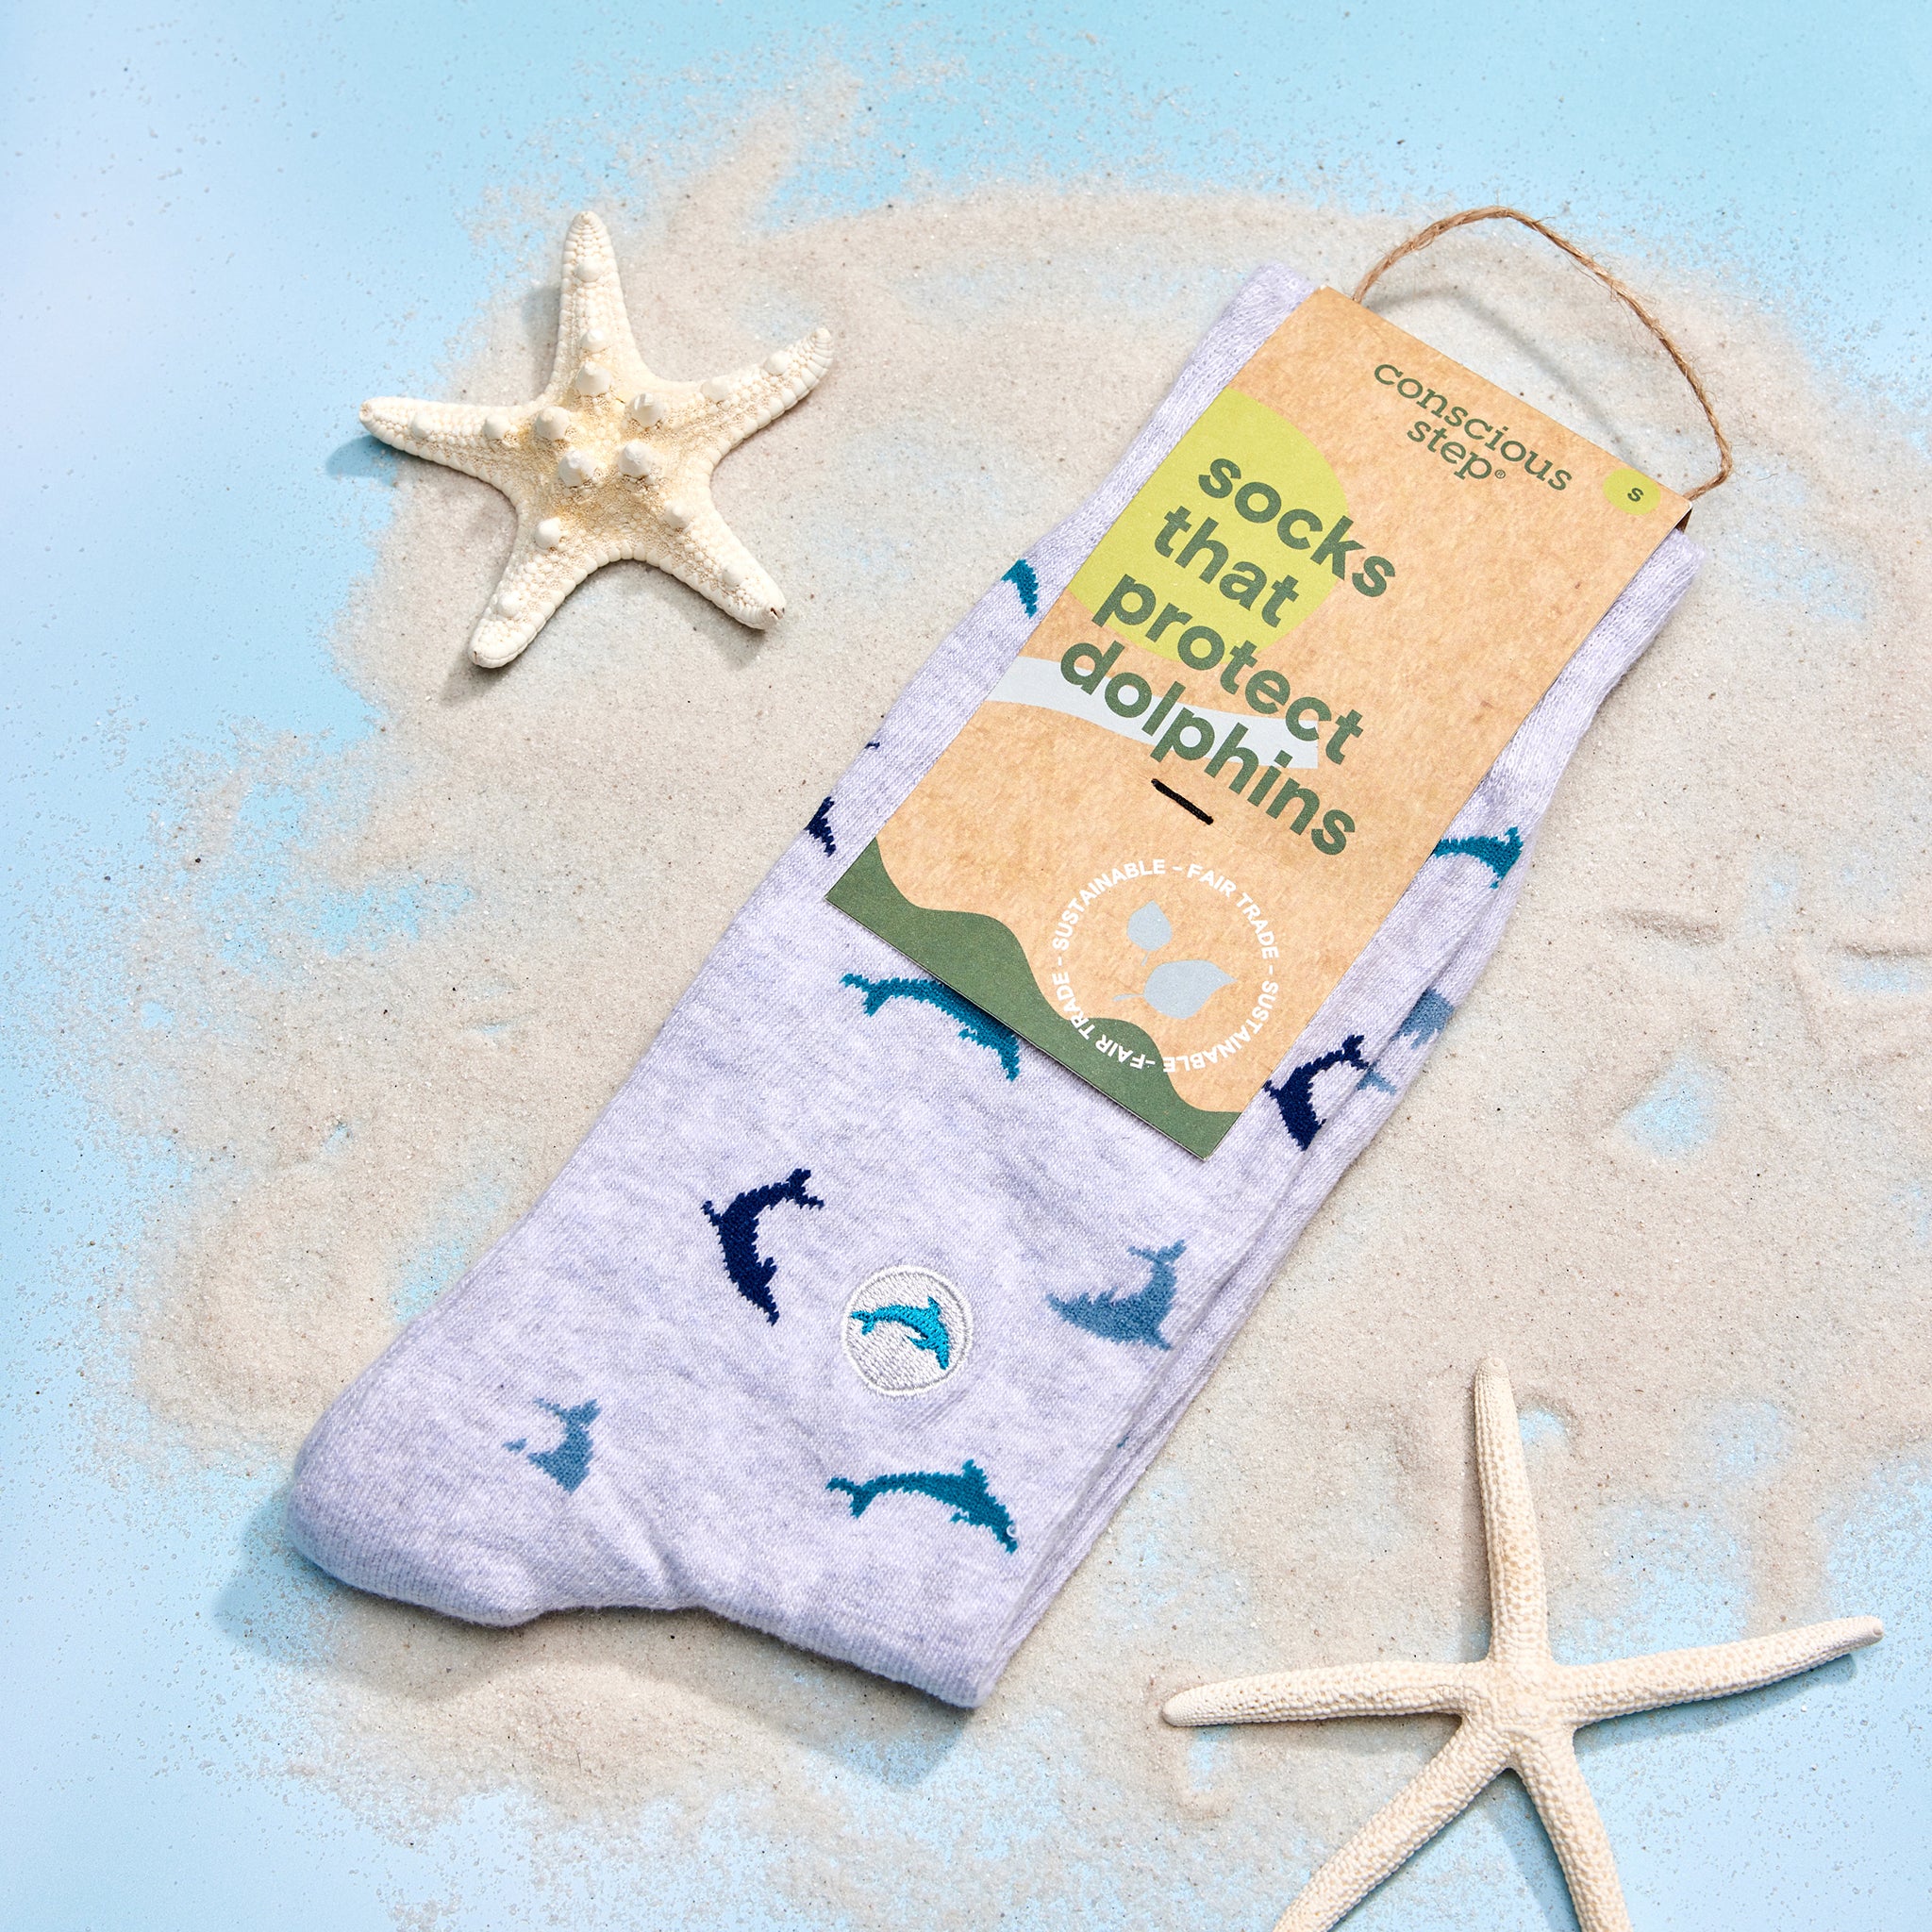 Socks that Protect Dolphins